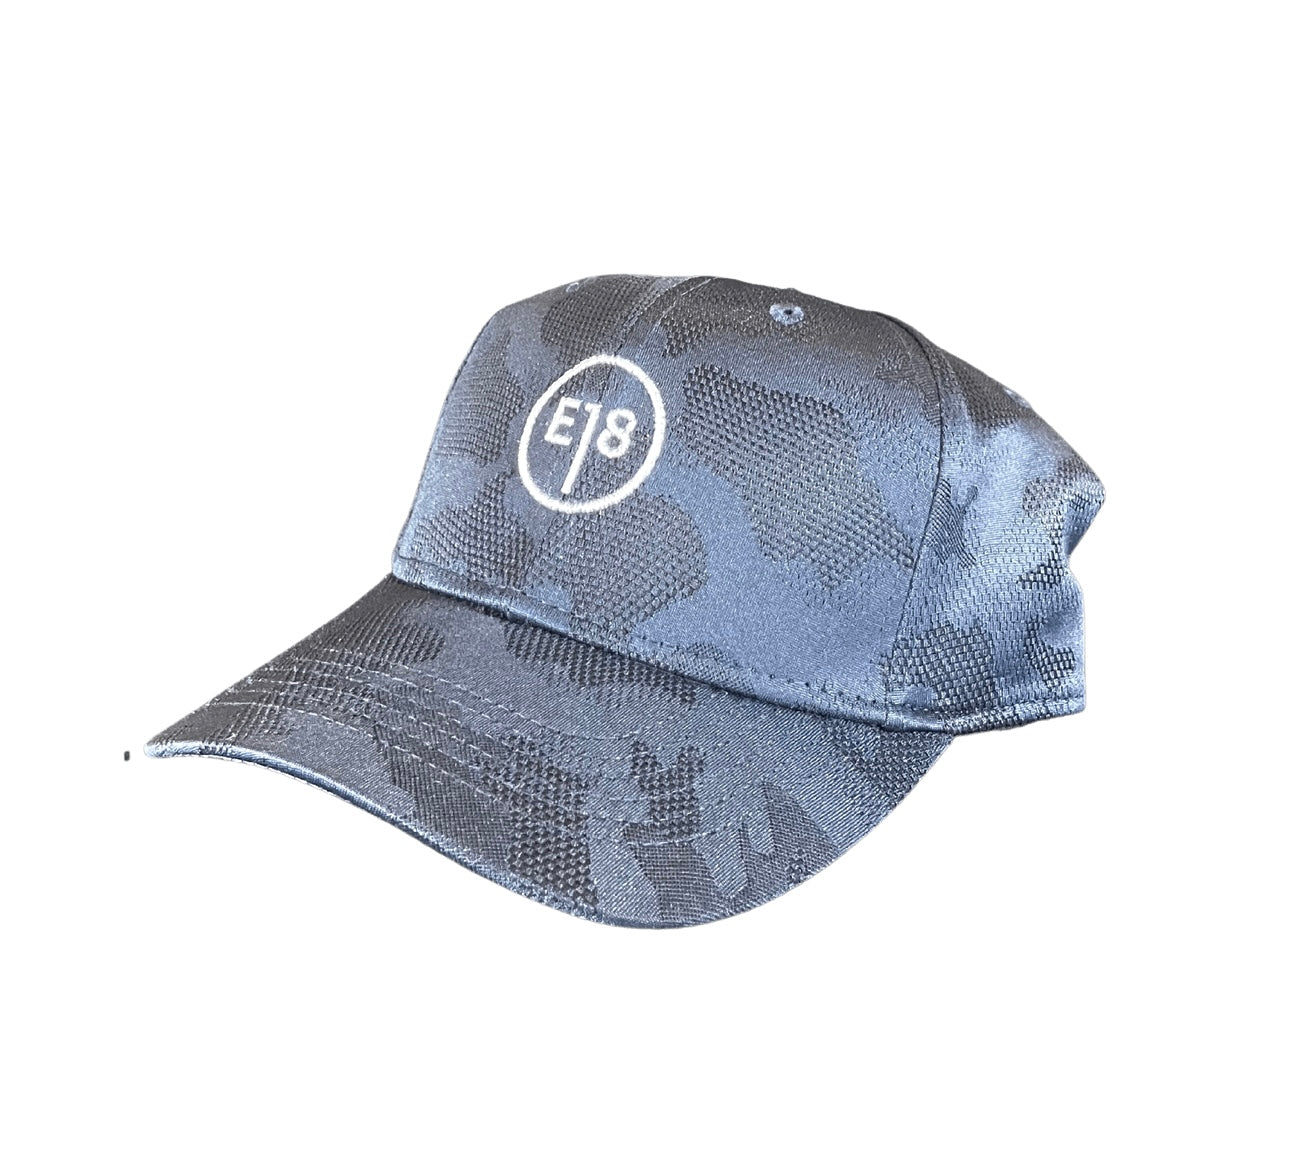 E18 "Dad Fit" Low Profile Midnight Camo Hat